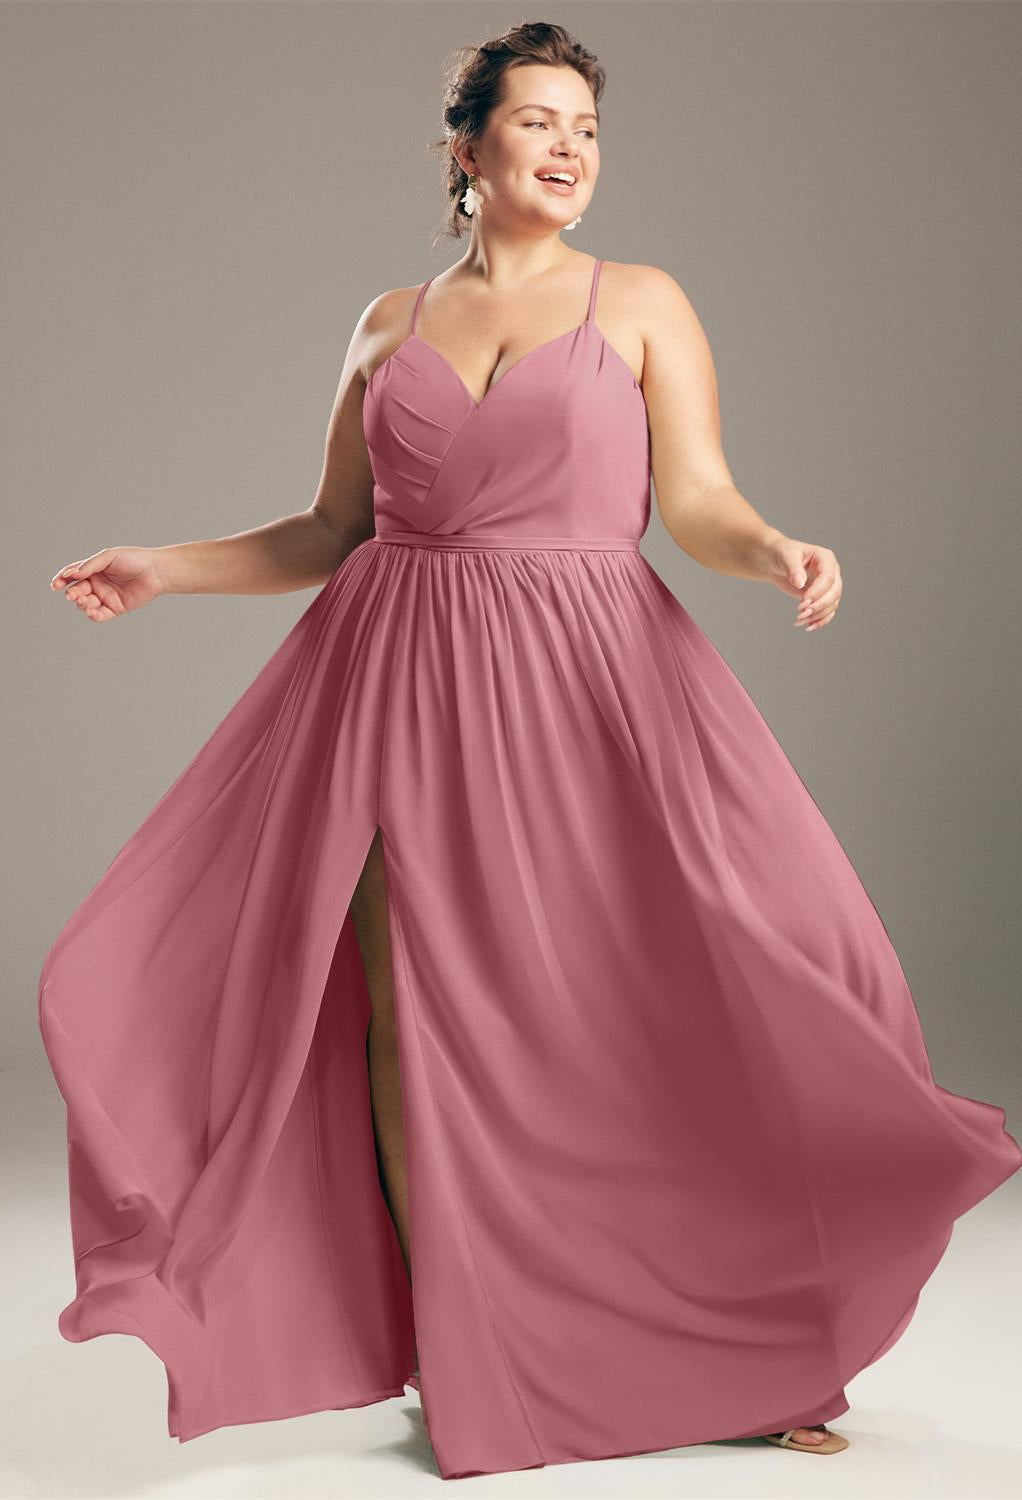 A woman in a flowing pink Wilfreda - Chiffon Bridesmaid Dress - Off The Rack from Bergamot Bridal in London smiling and posing playfully against a neutral background.